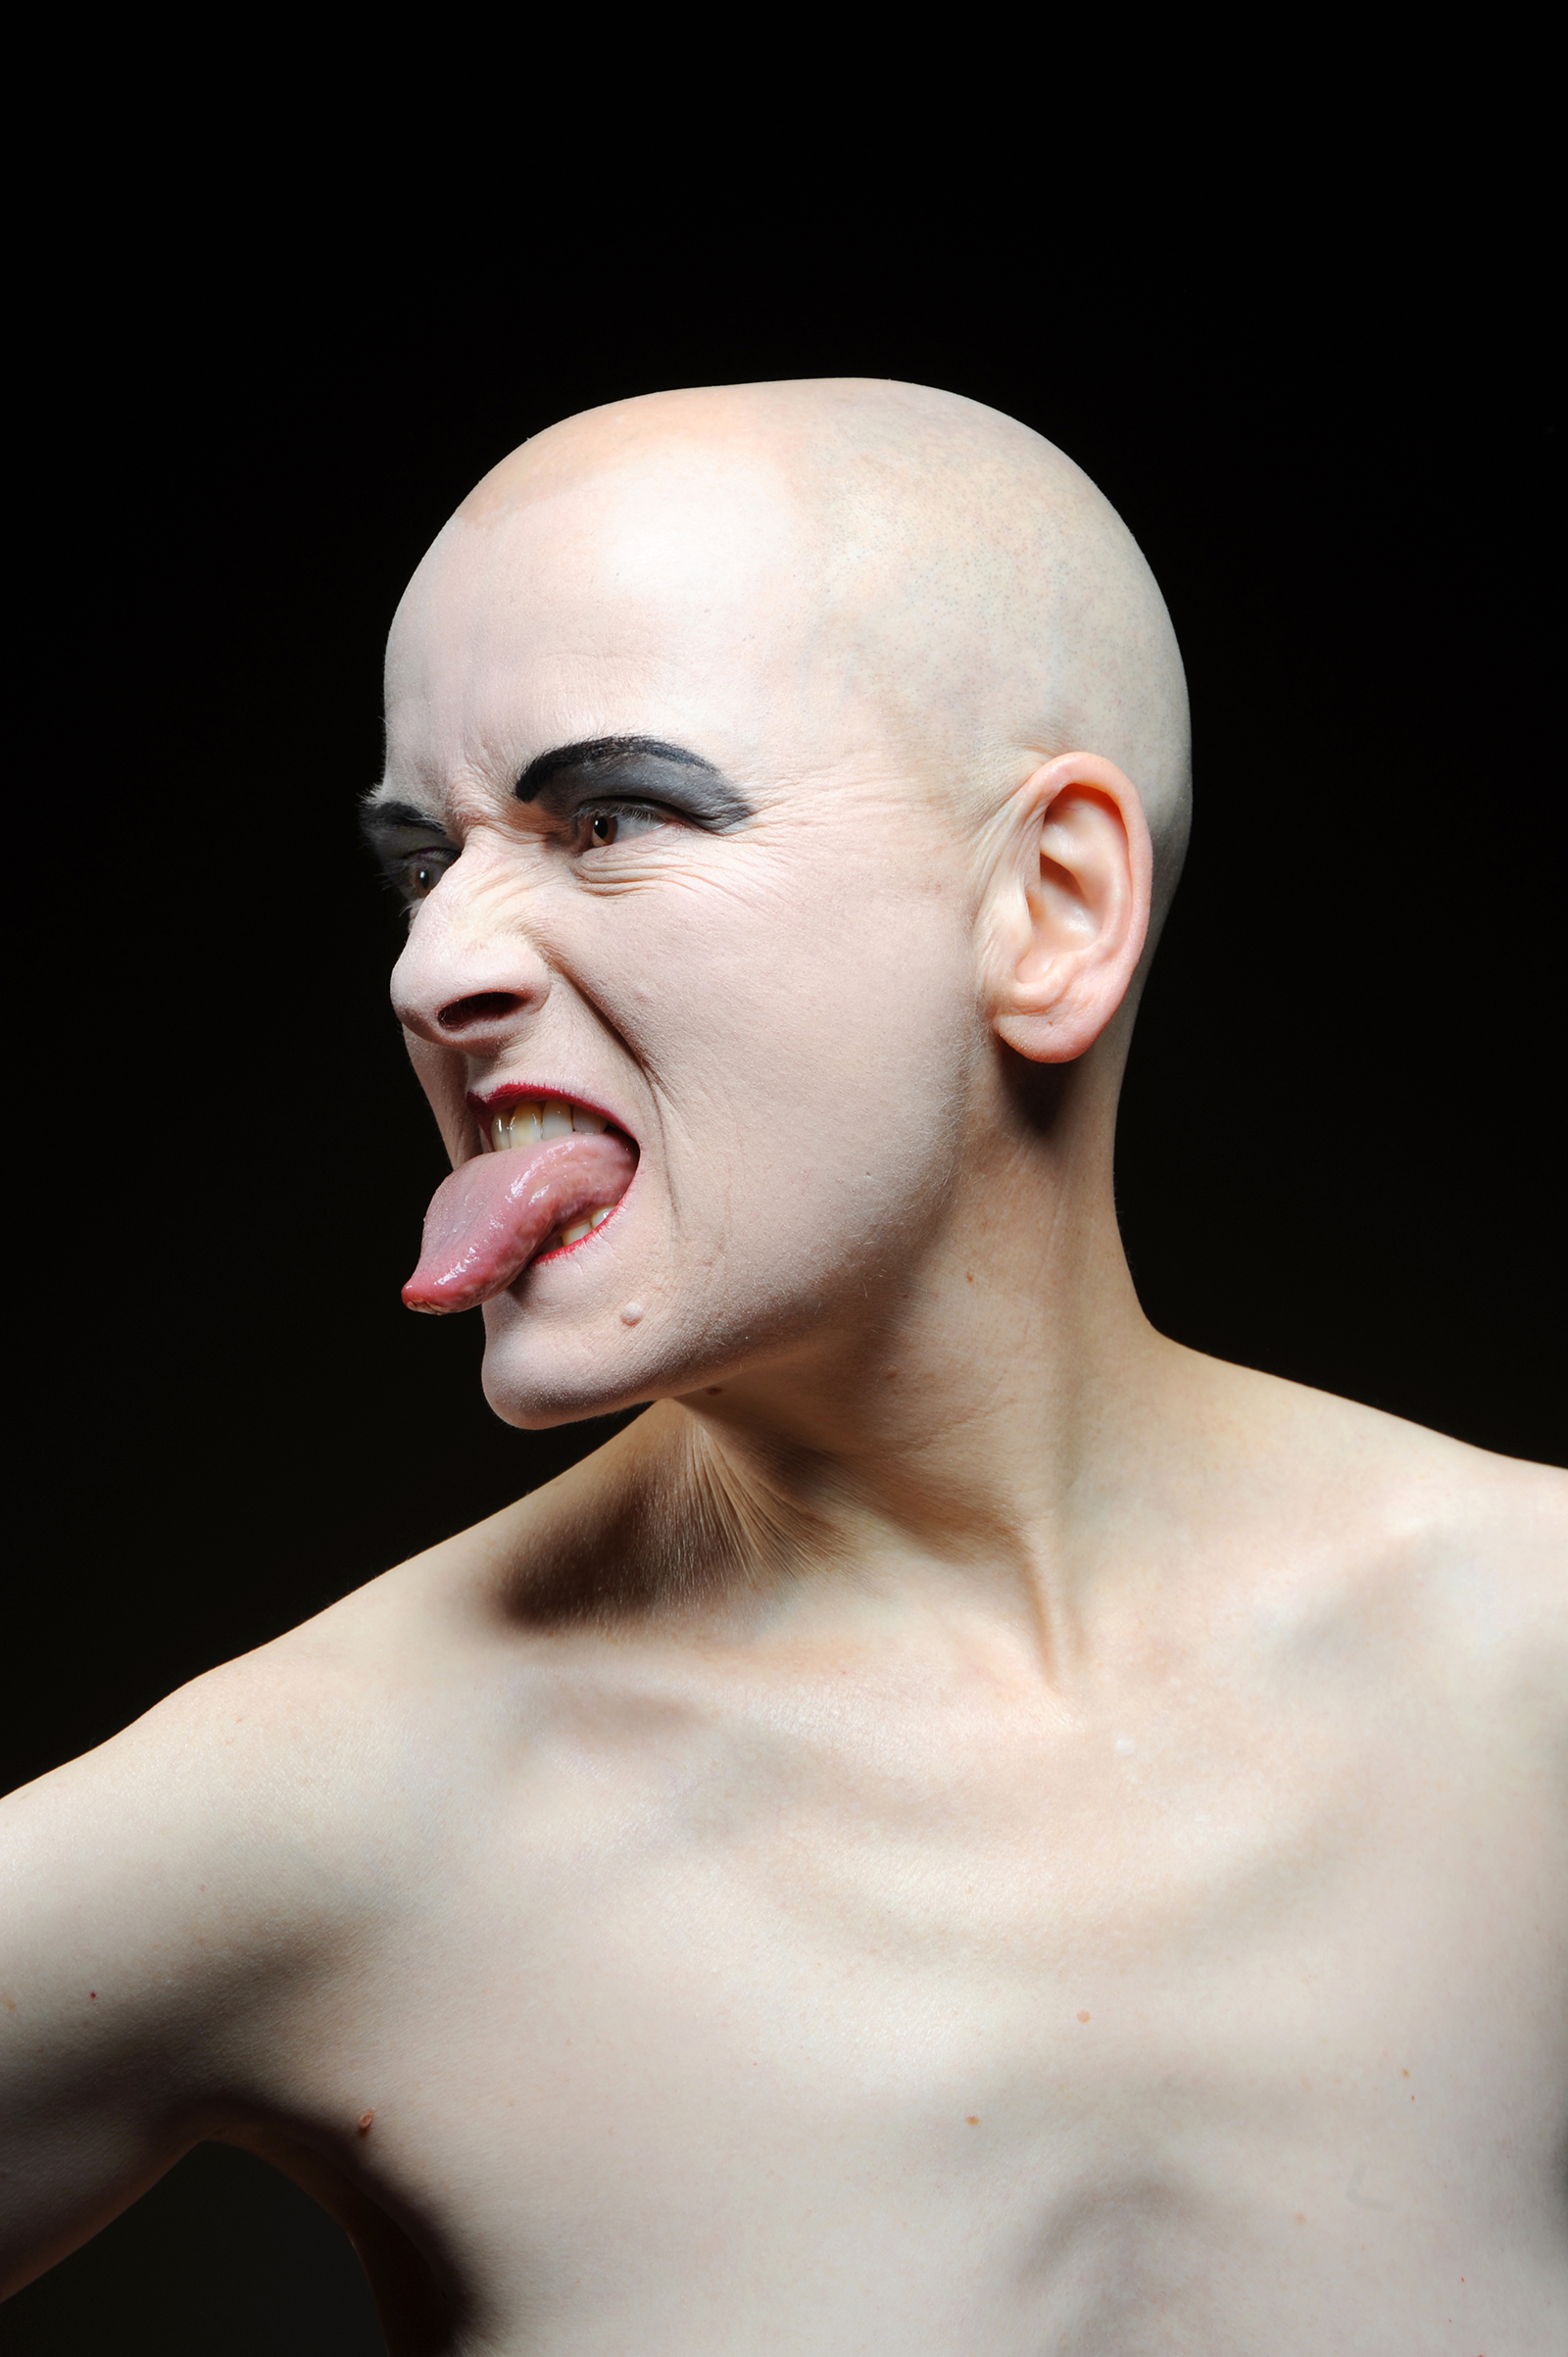 A person with a bald head and make-up sticks out his tongue.